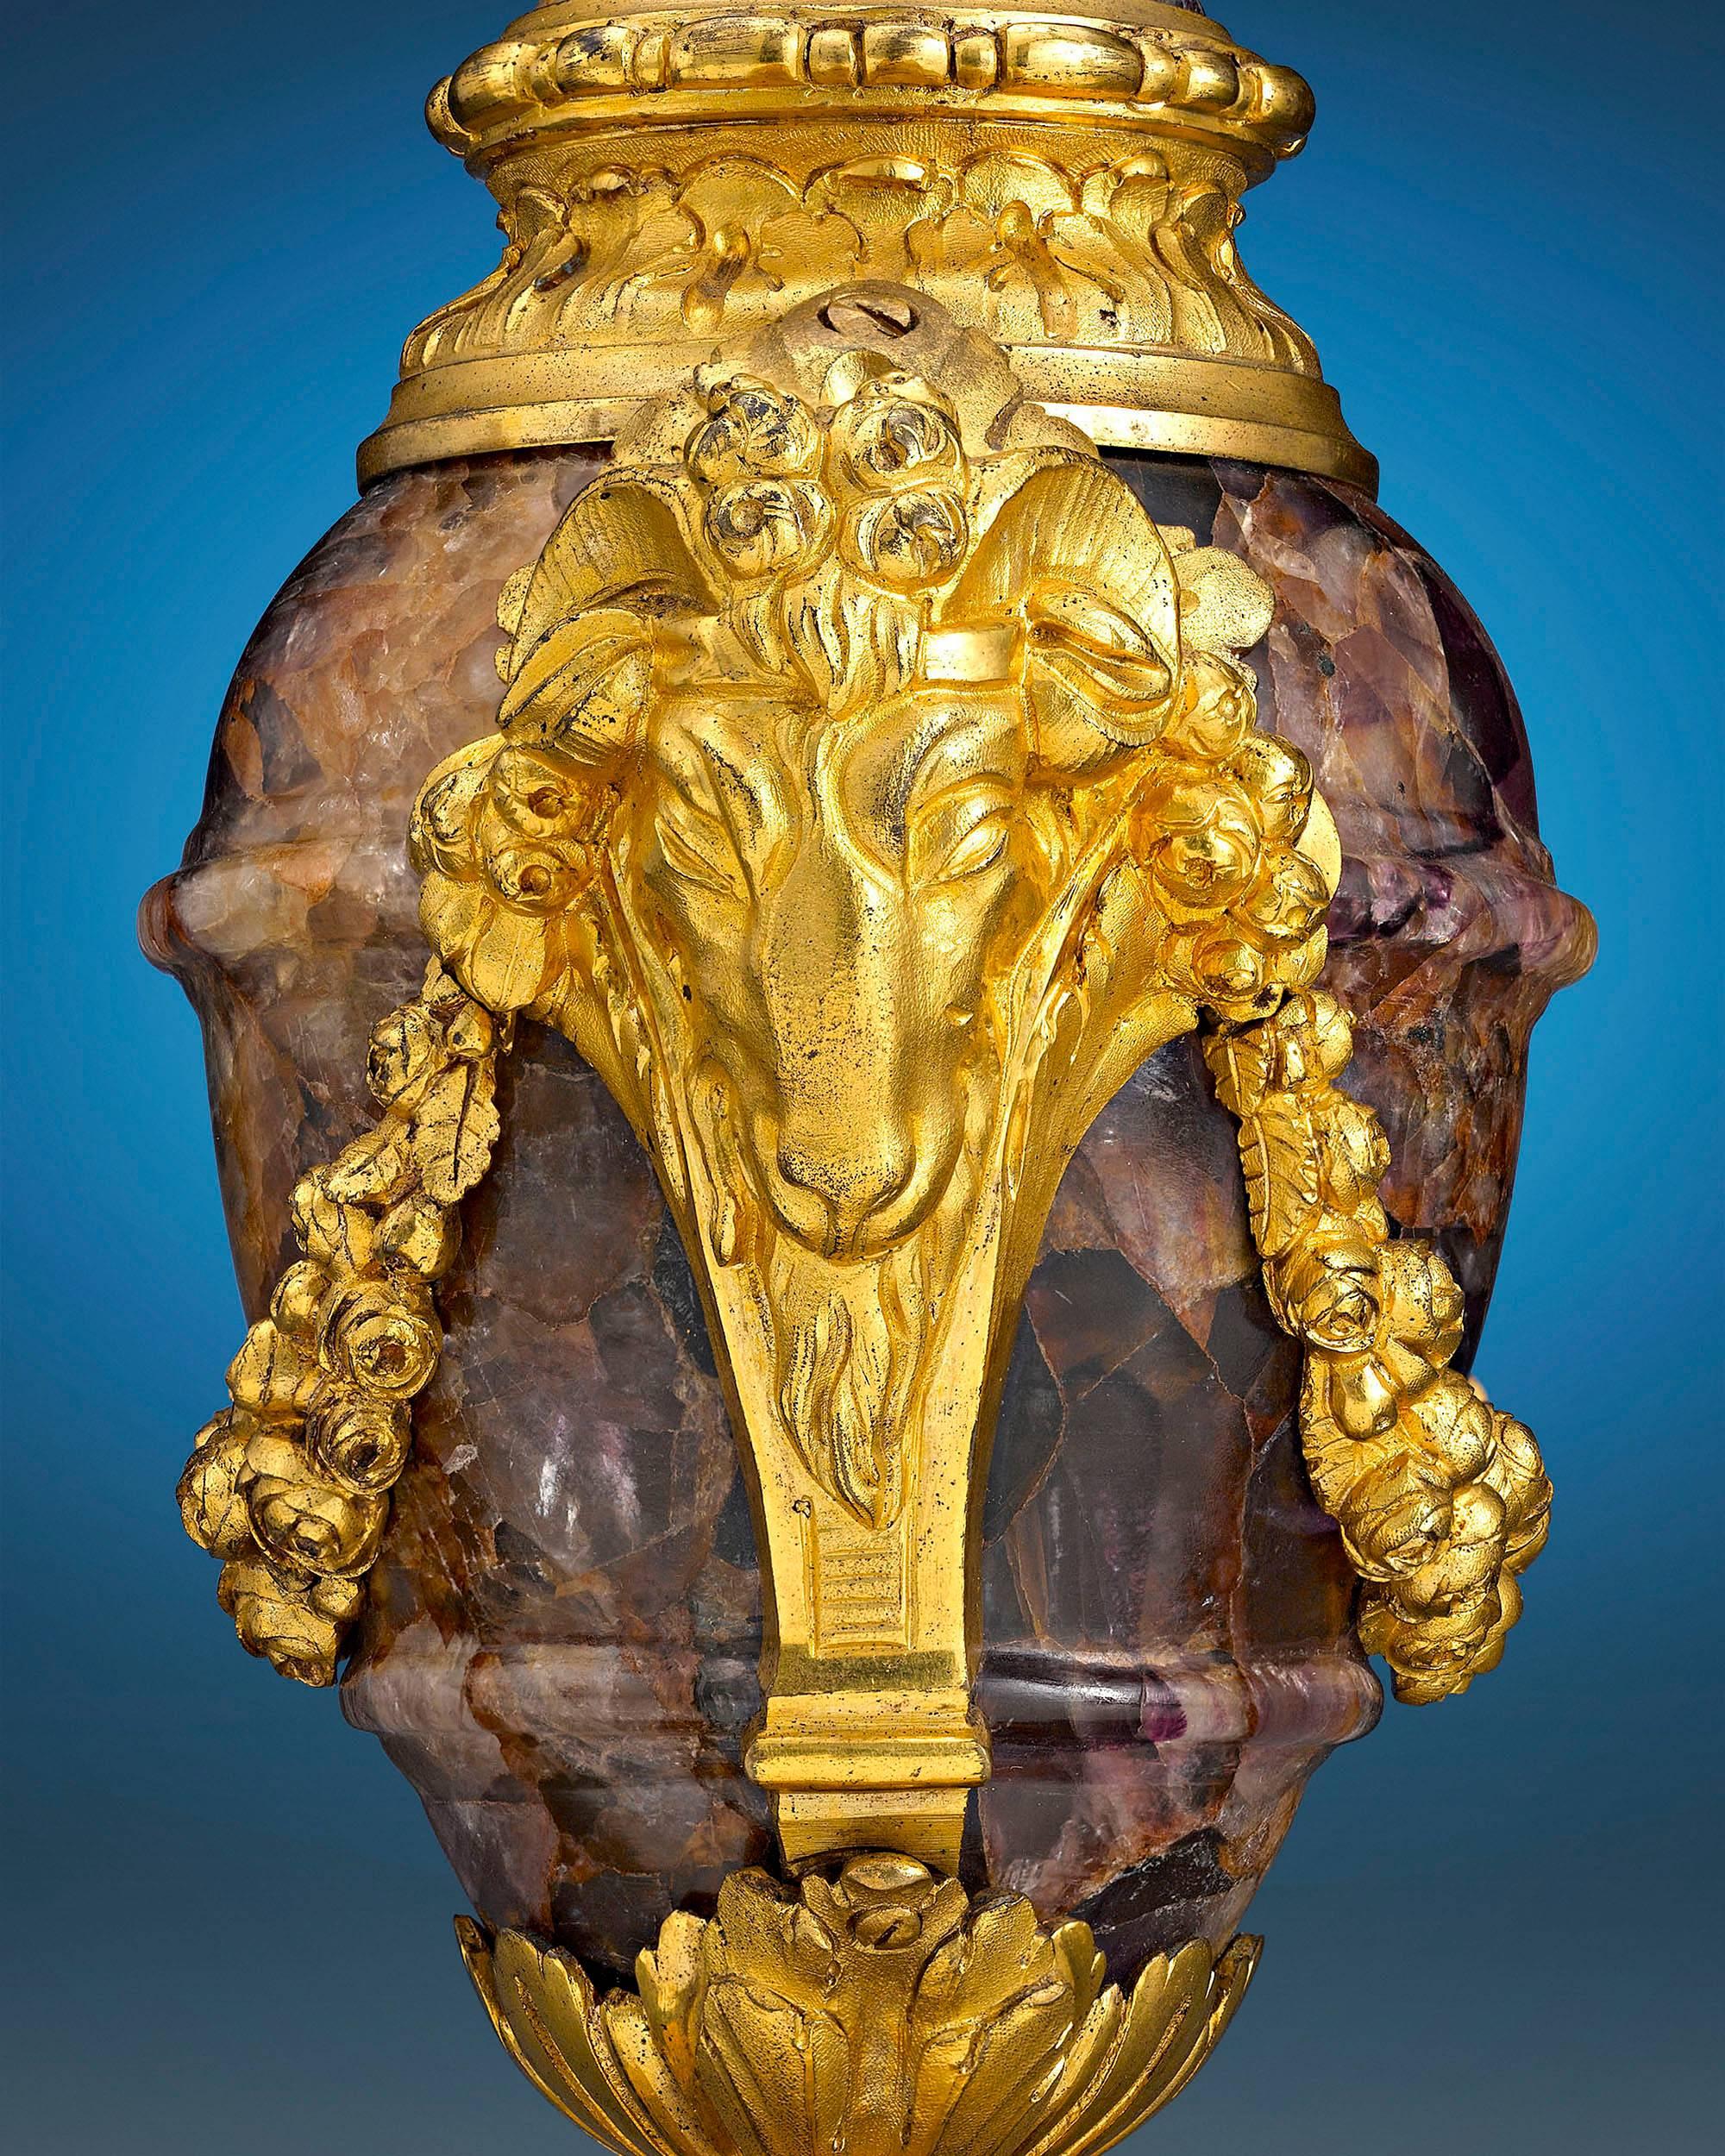 Mounted in resplendent ormolu, these remarkable and rare urns are crafted of Blue John, or Derbyshire Spar stone. Their forms are inspired by antiquity, with the now-extinct mineral's characteristic purple, blue and yellow grain contrasting